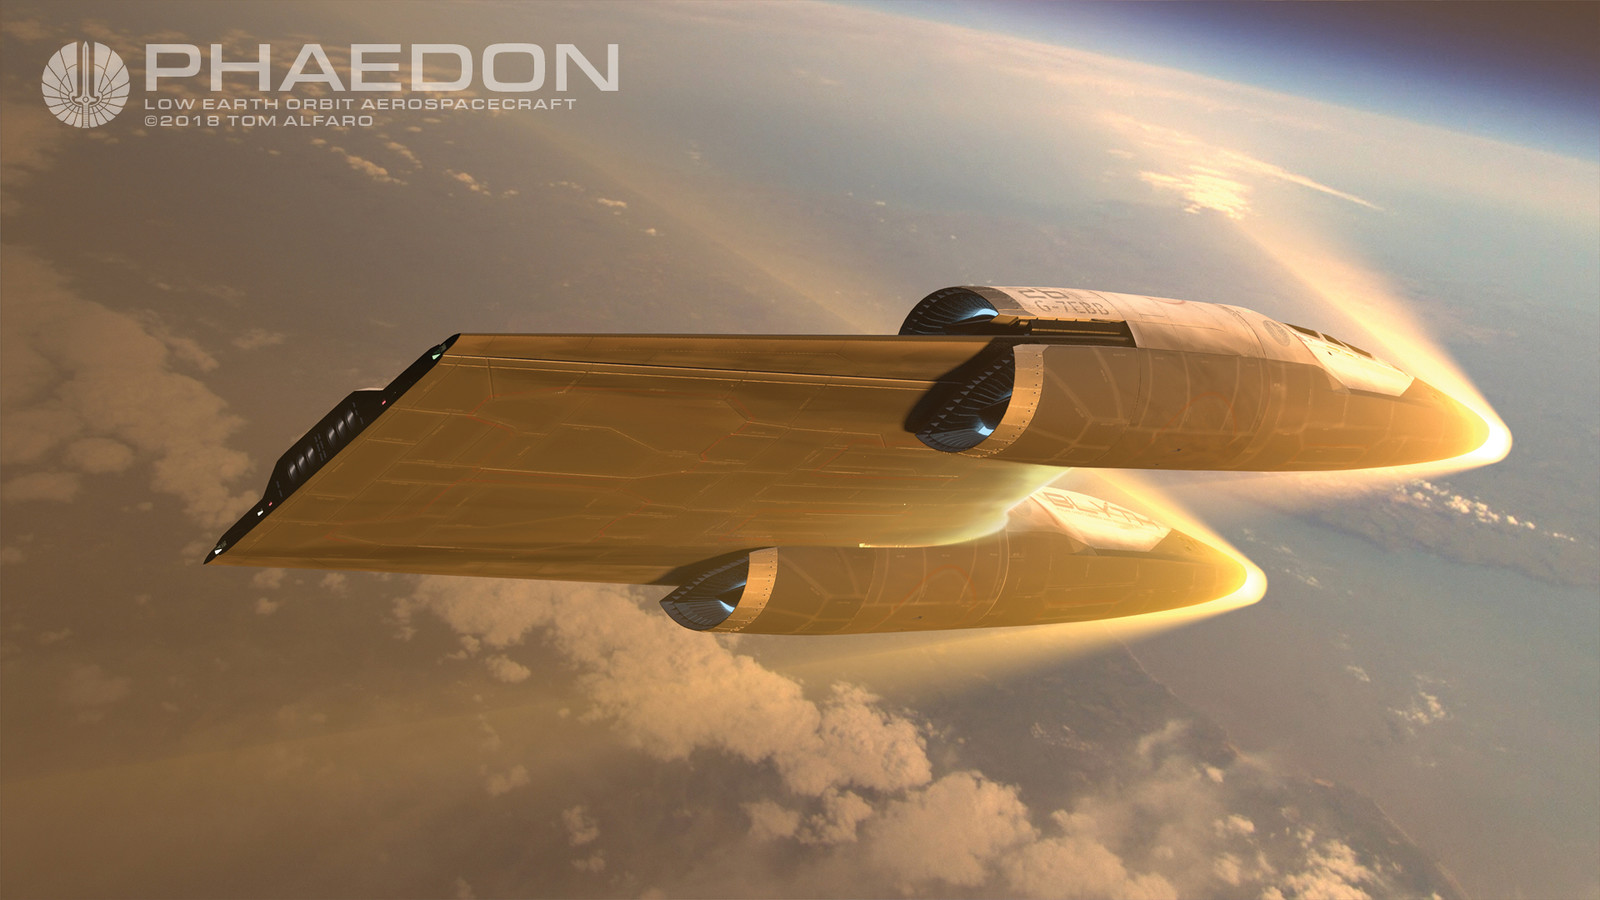 Phaedon aerobraking to descend from orbit. During reentry into the atmosphere, wings are fully retracted to reduce exposure to extreme pressures and temperatures.